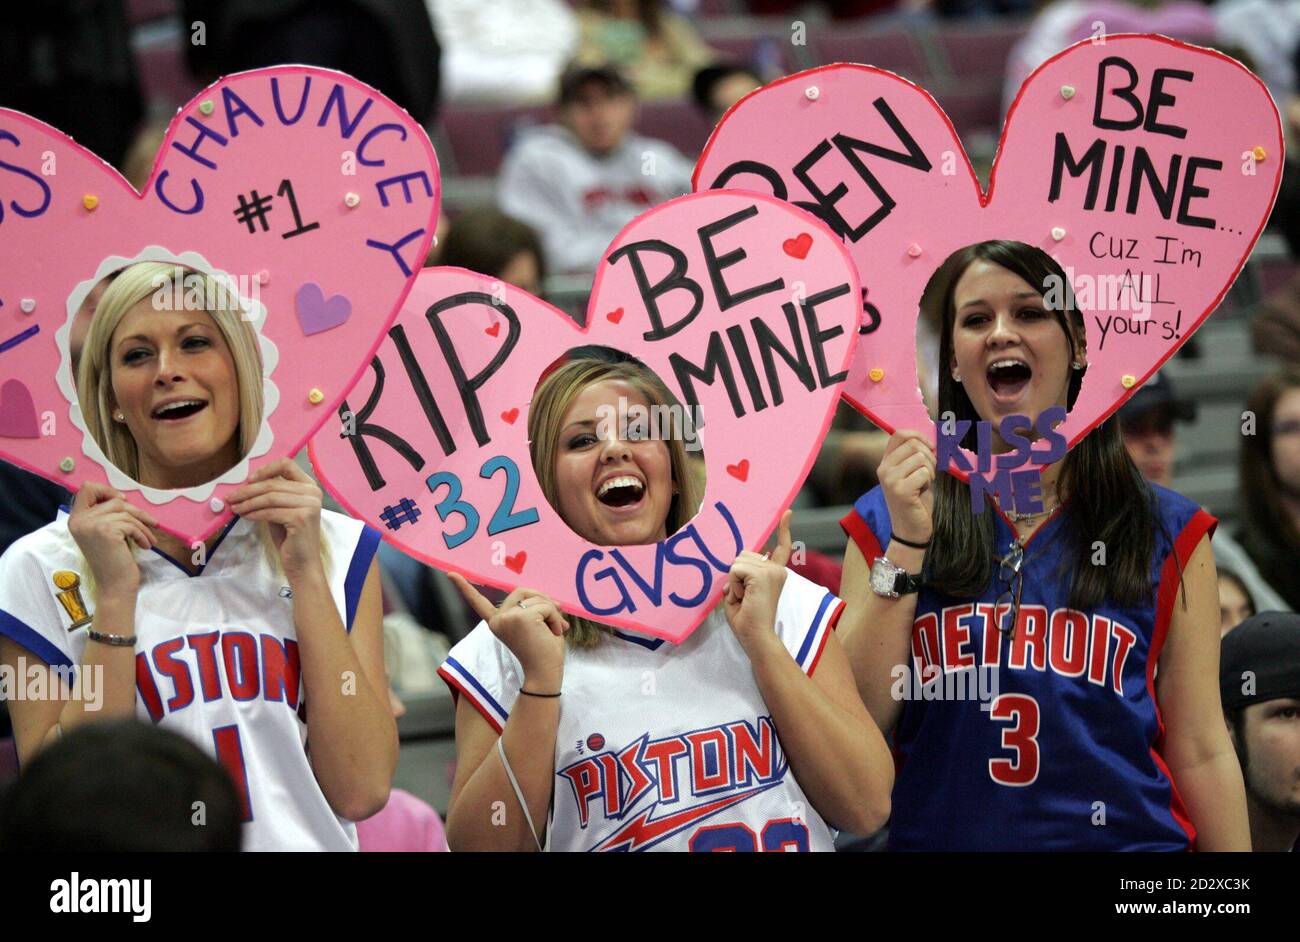 Detroit Pistons Fans High Resolution Stock Photography and Images - Alamy